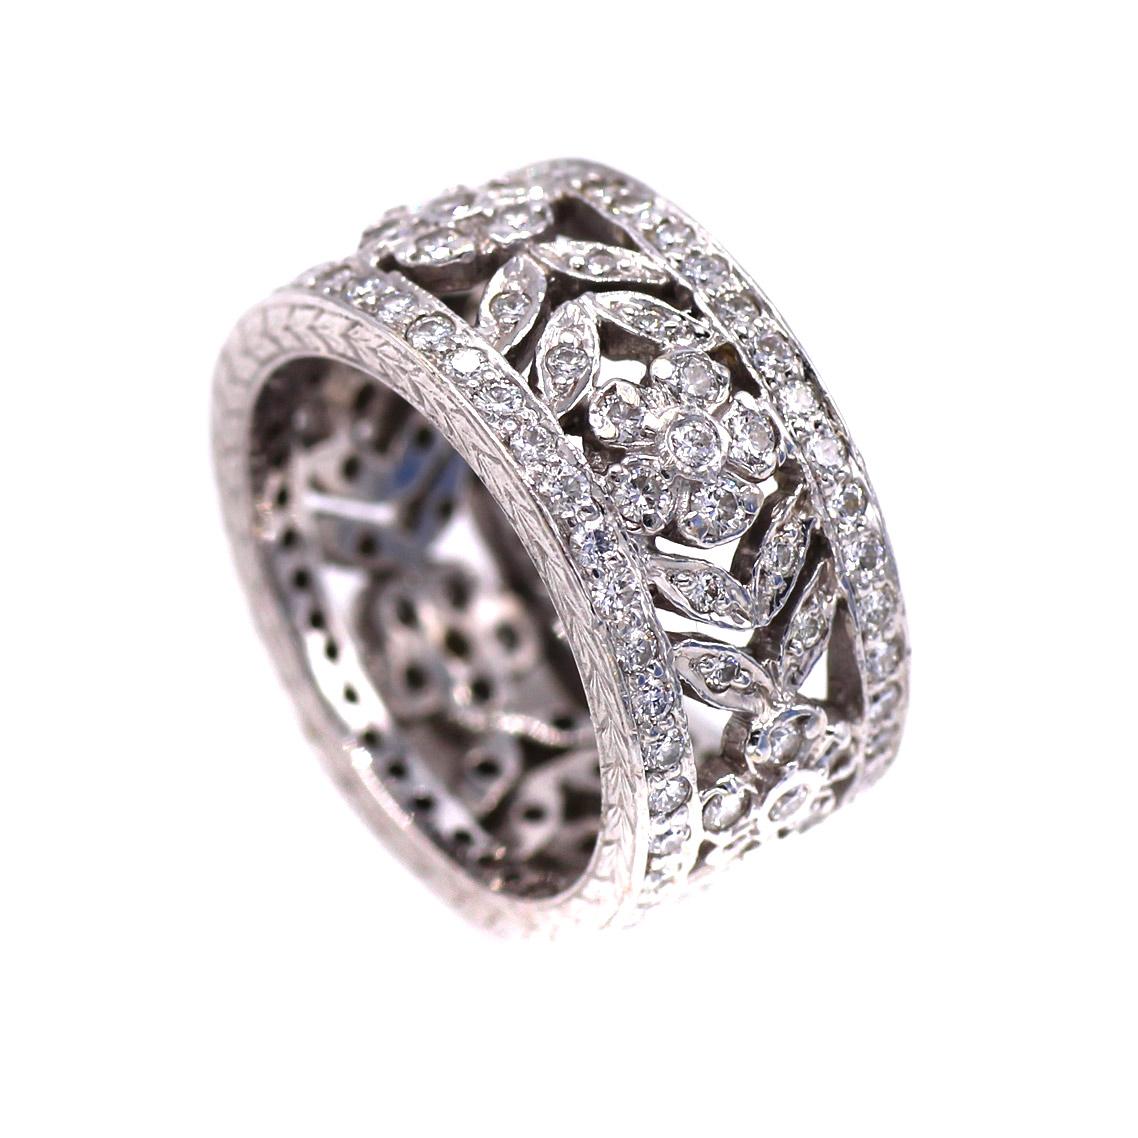 Beautifully designed and masterfully handcrafted this unique 1950s eternity band exhibits an amazing craftsmanship. Between two outer bands with channel set bright white round diamonds, a floral design of blossoms and leaves repeats its self around